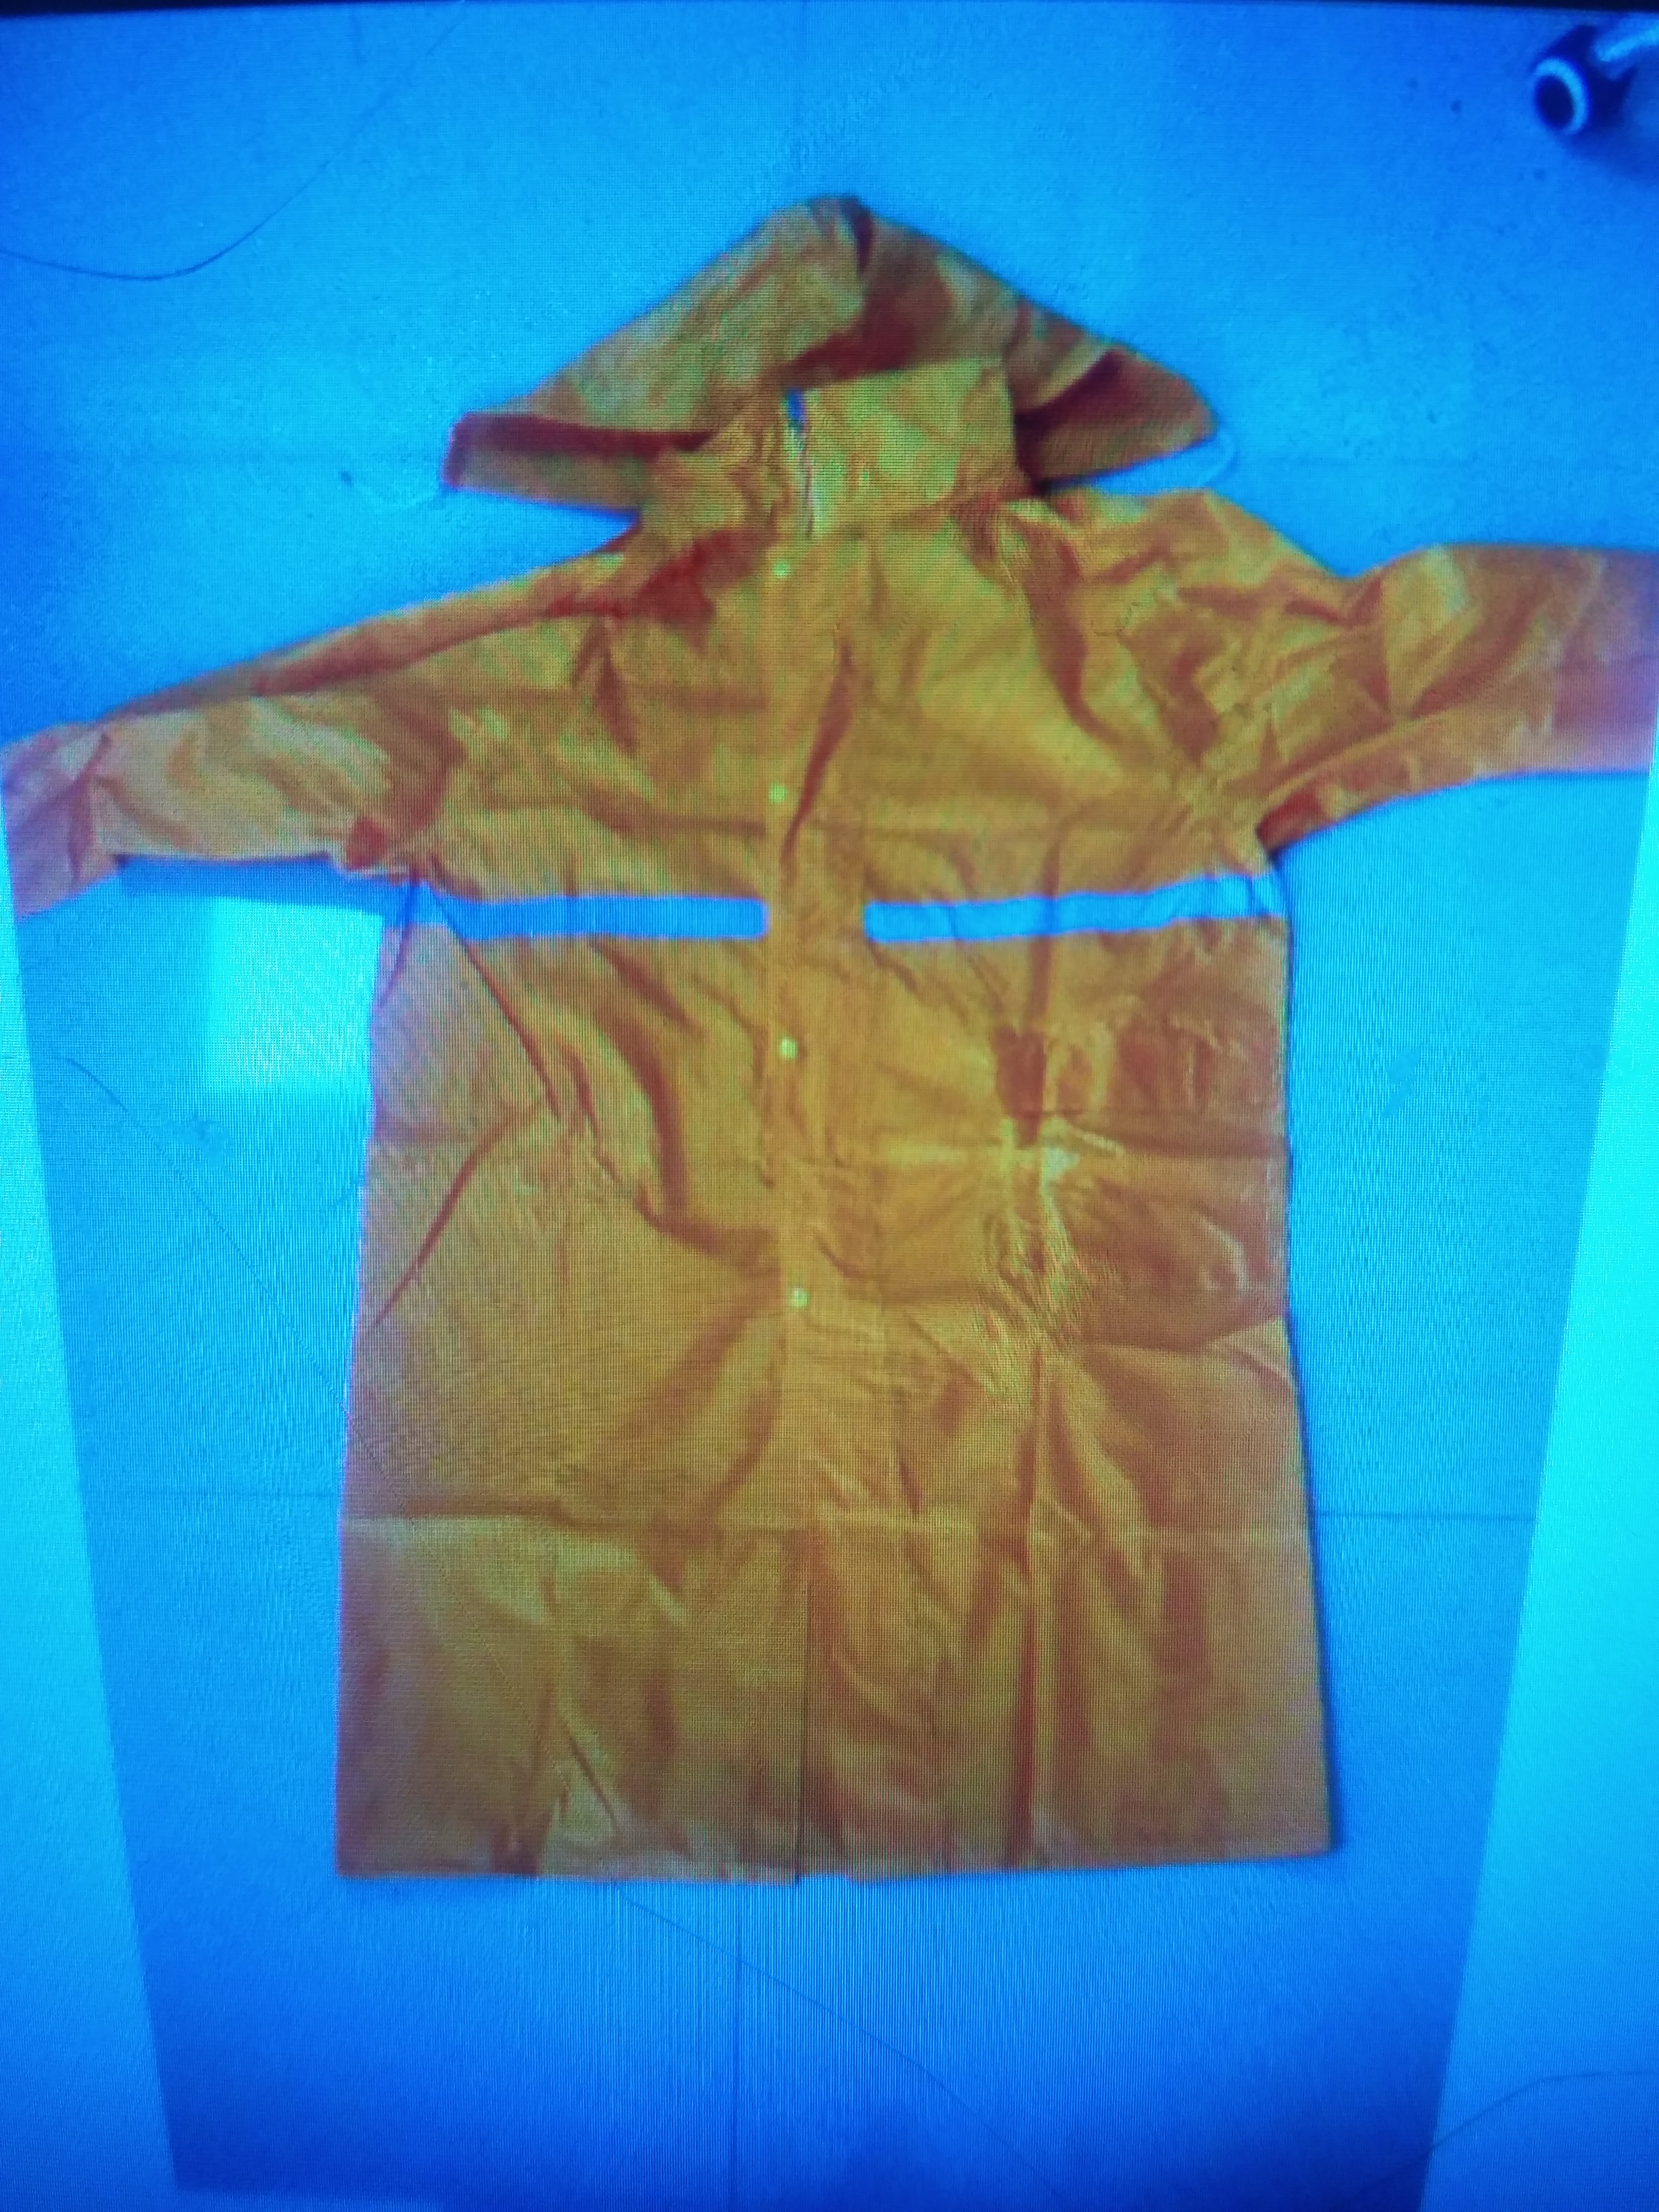 We will buy 25,000 pcs of raincoat
Color: yellow or orange
PVC material
Standard size
Price up to $ 1.9